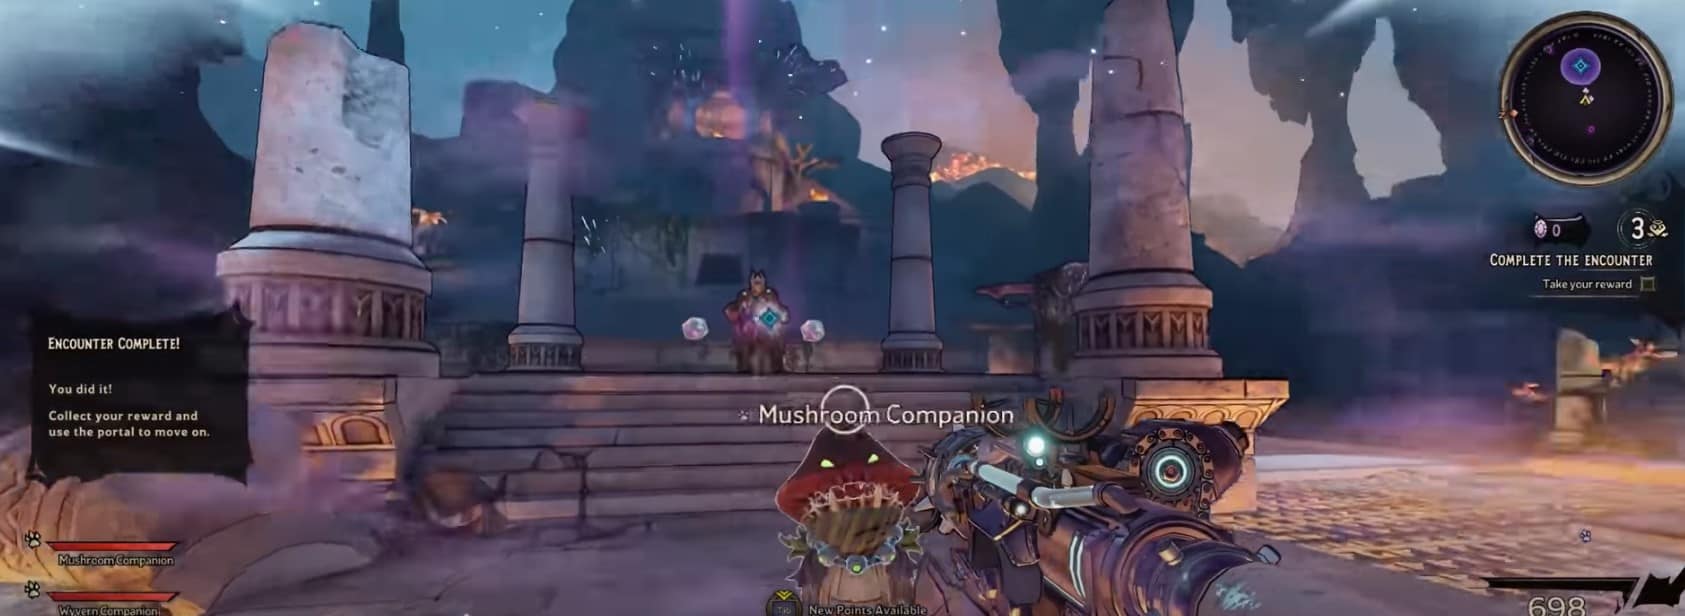 How To Find Secret Raid Bosses in Tiny Tina’s Wonderlands